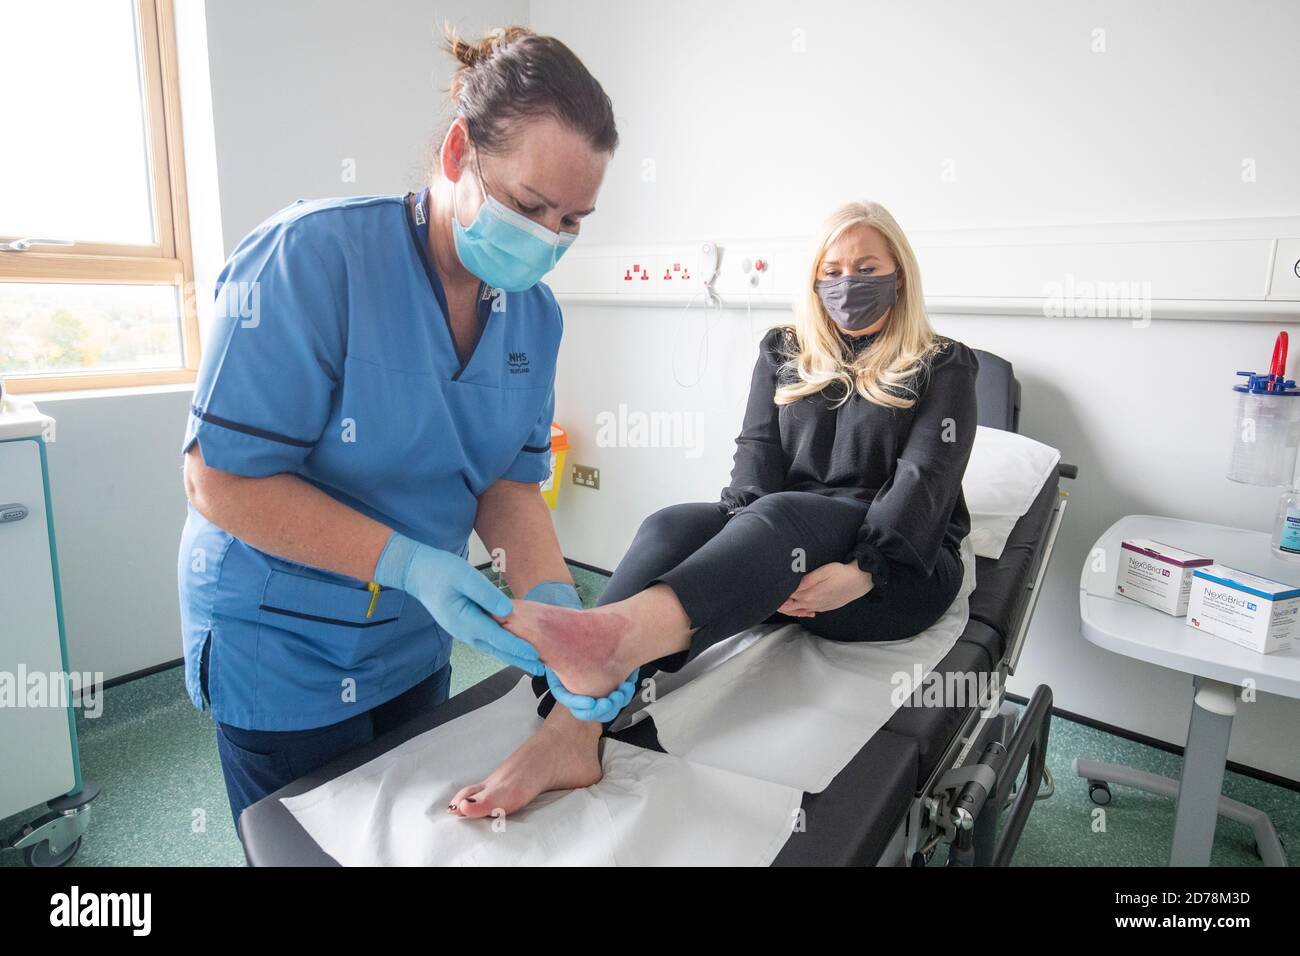 Lee-Anne Jones, from Foulden, Berwickshire, has the burn wound on her foot checked by nurse Isabelle Sweeny at the burns unit at St John's Hospital, Livingston. Lee-Anne received a new treatment called NexoBrid that uses enzymes extracted from pineapple plants to help remove the dead or burnt skin, leaving behind only healthy tissue. Stock Photo